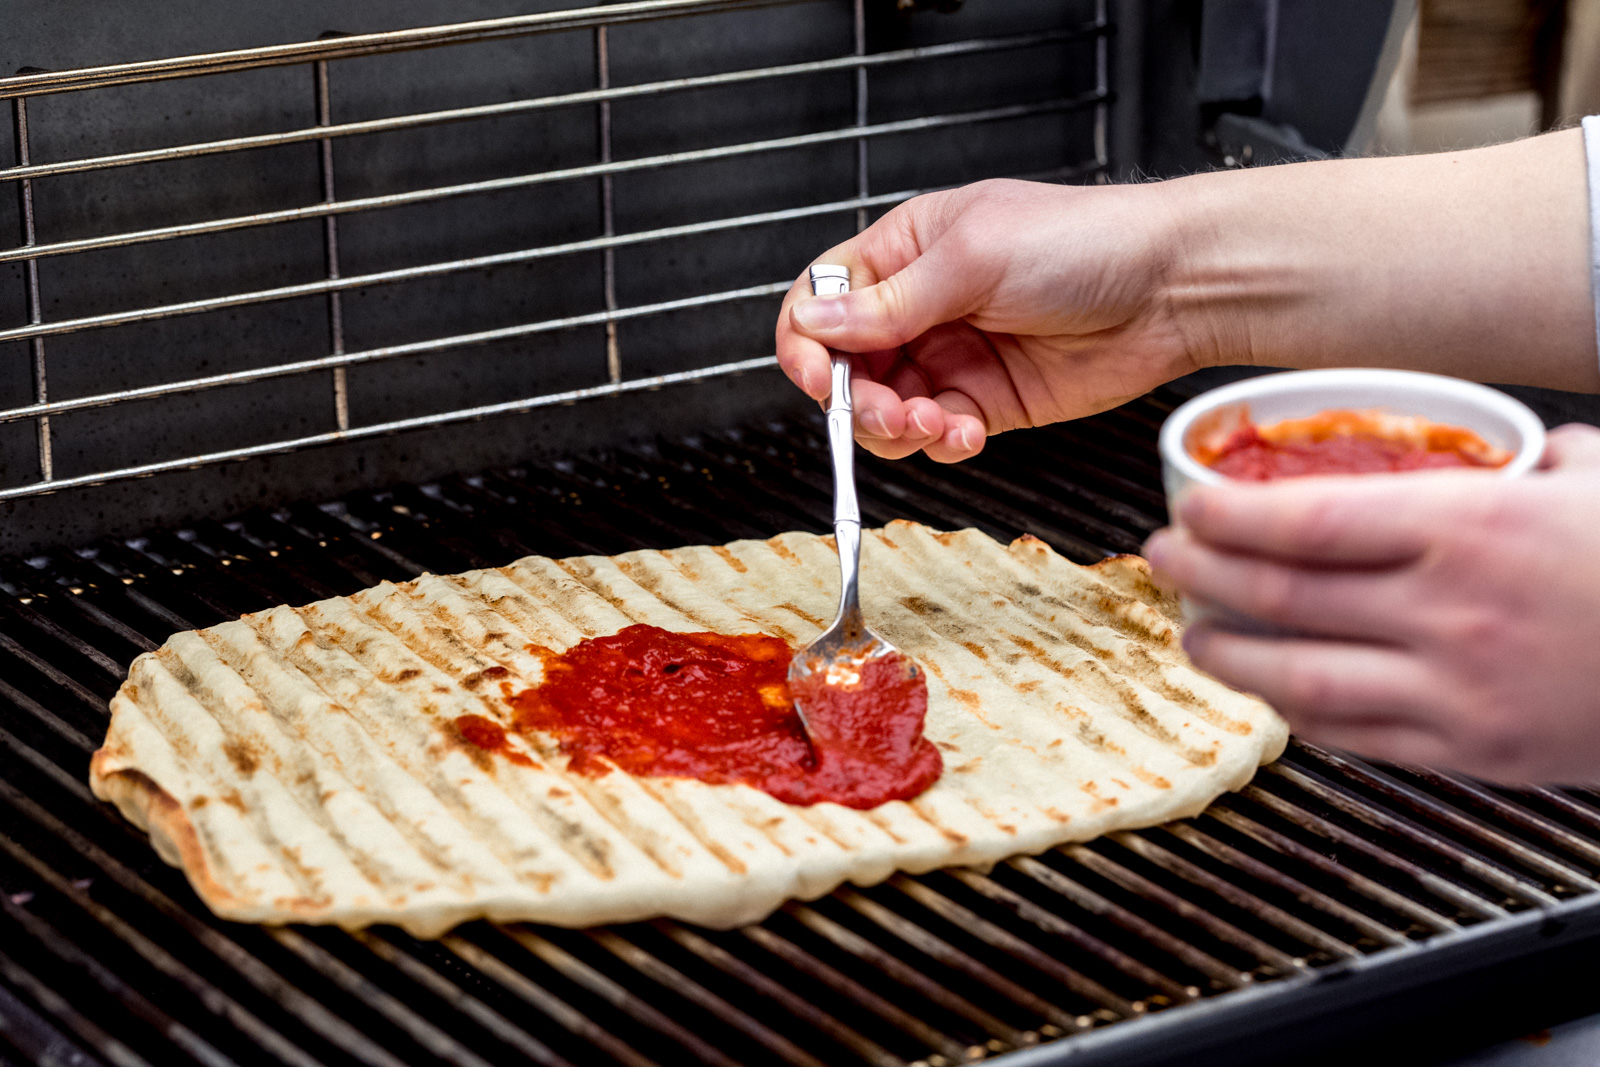 adding tomato sauce to a pizza on the grill 